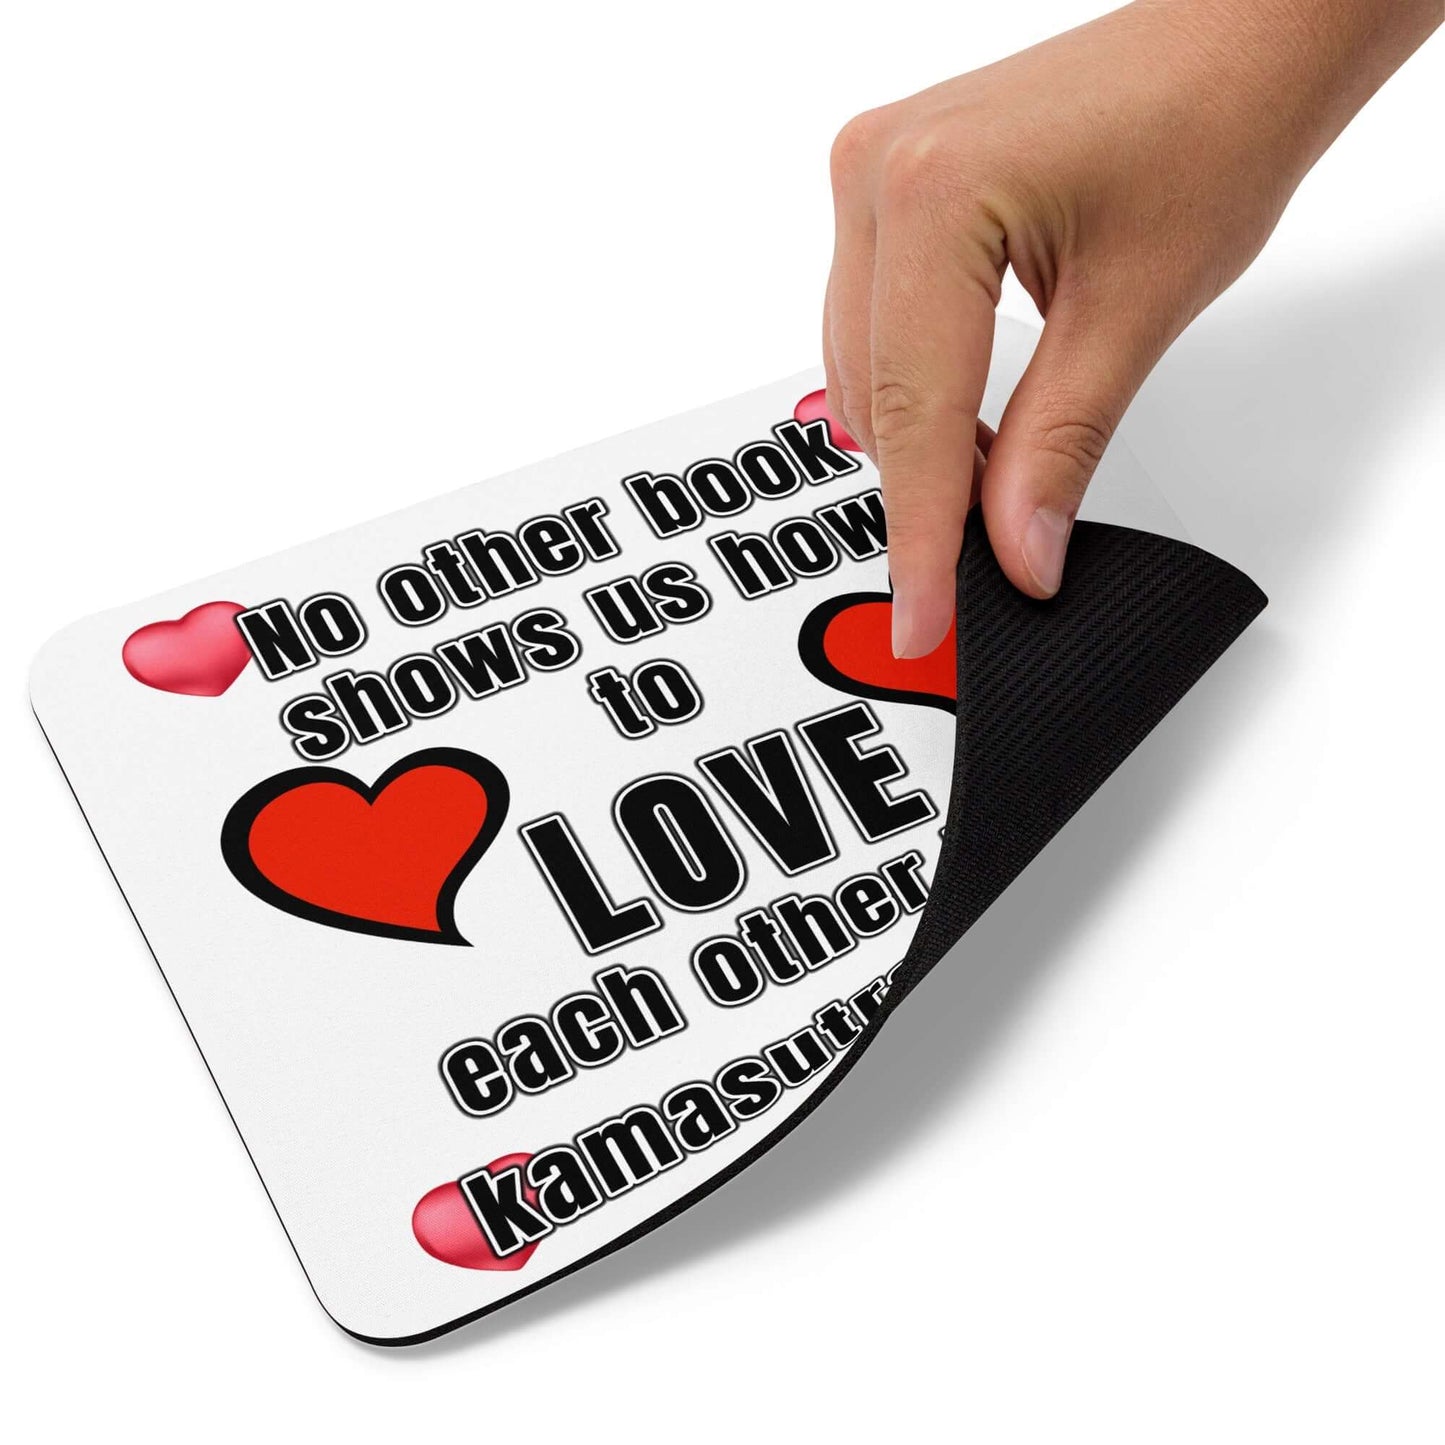 No other book shows us how to love each other like the Kamasutra does - Mouse pad bible indian Kamasutra love sex